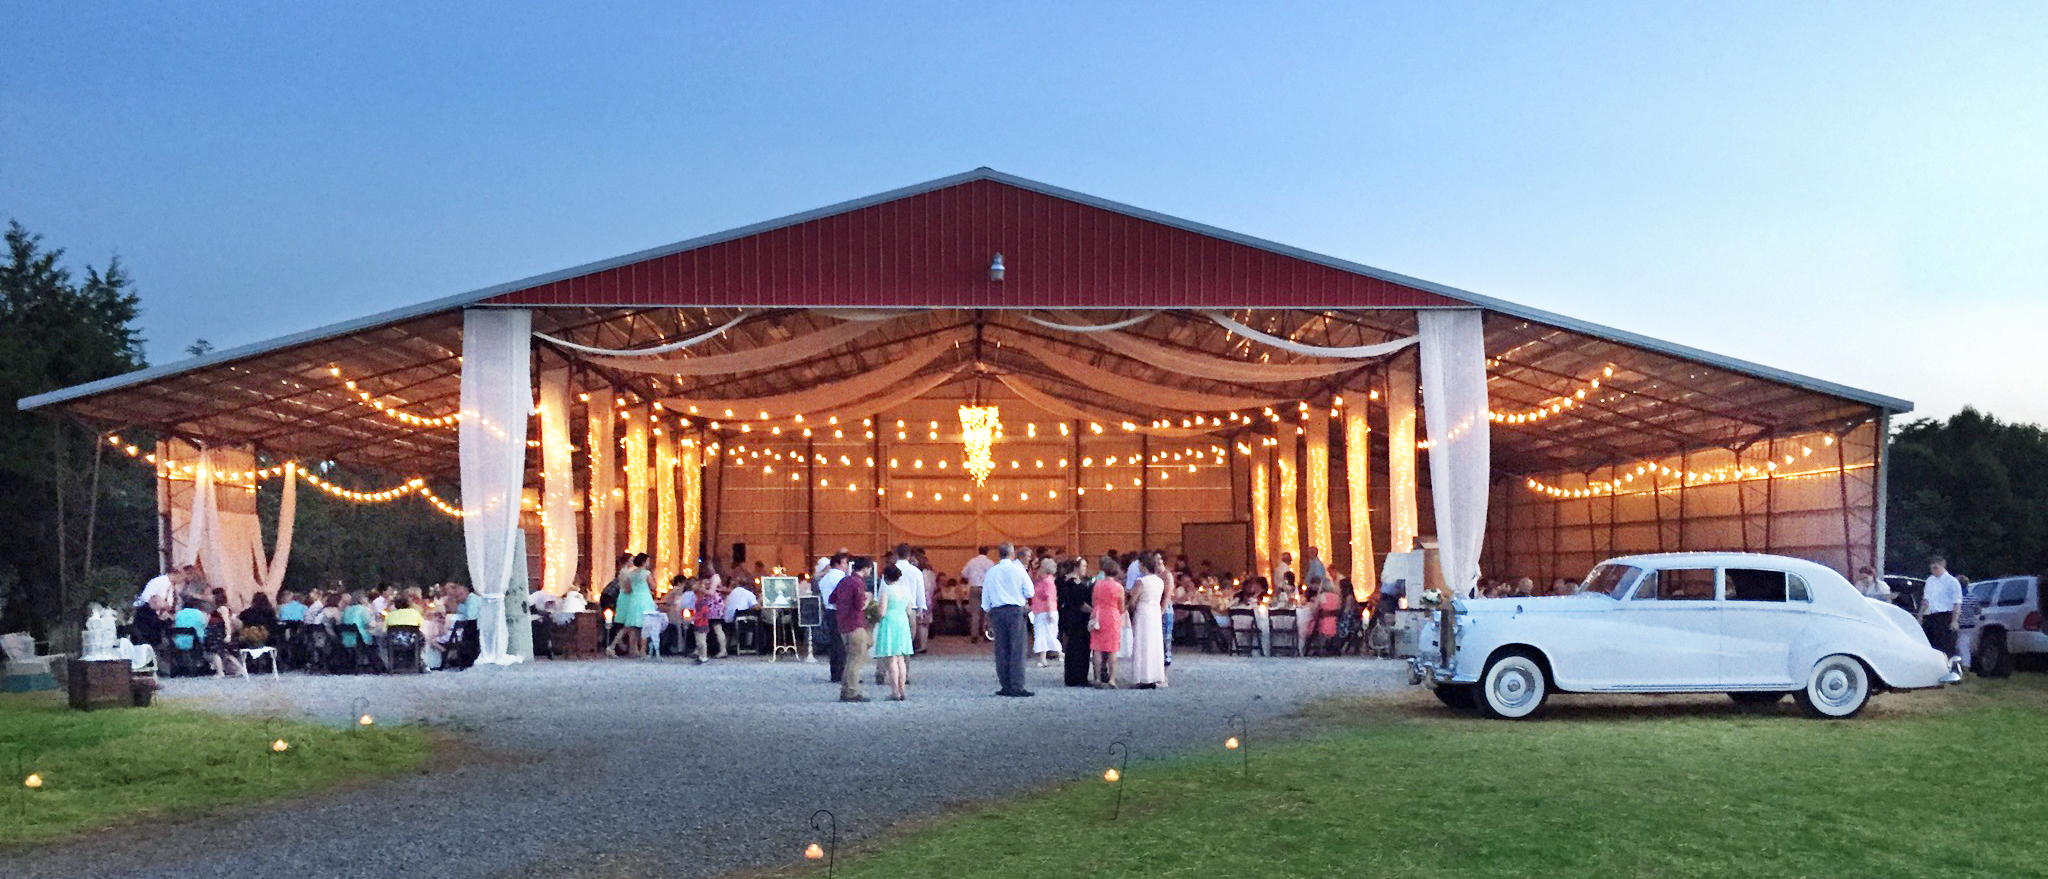 An outdoor event space built with a rigid steel frame by Worldwide Steel Buildings.